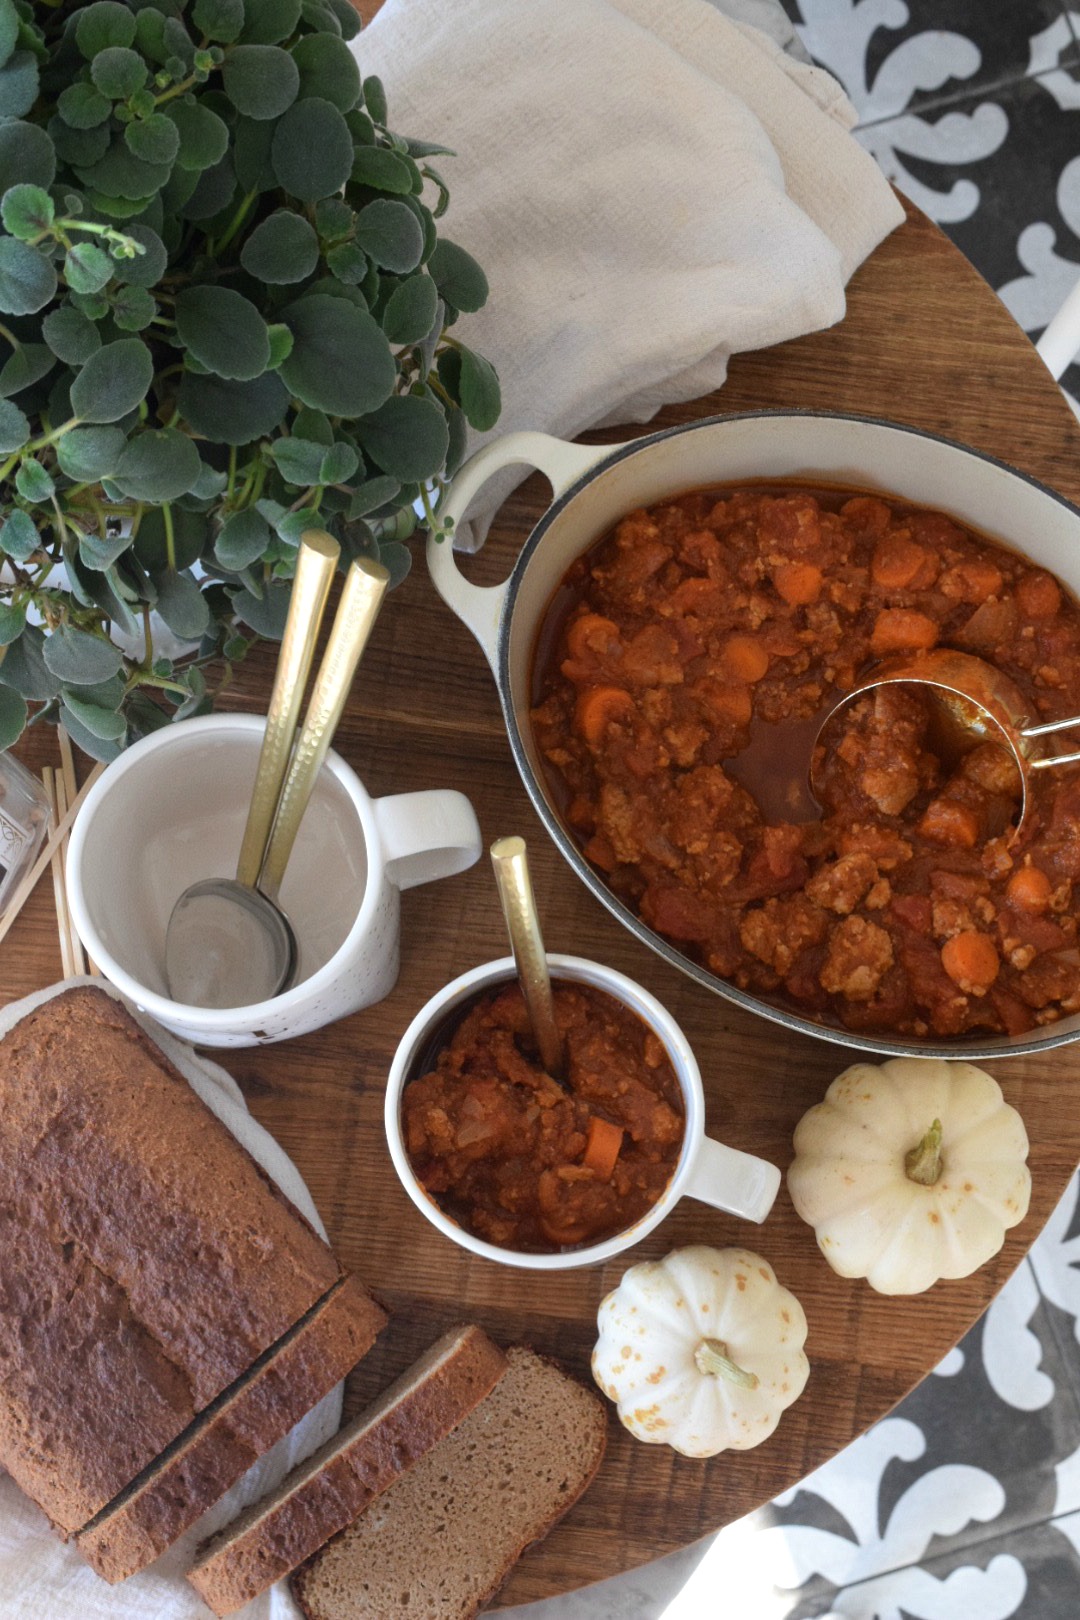 Paleo and Gluten-Free Fall Dinner- Pumpkin Chili with Paleo BREAD!